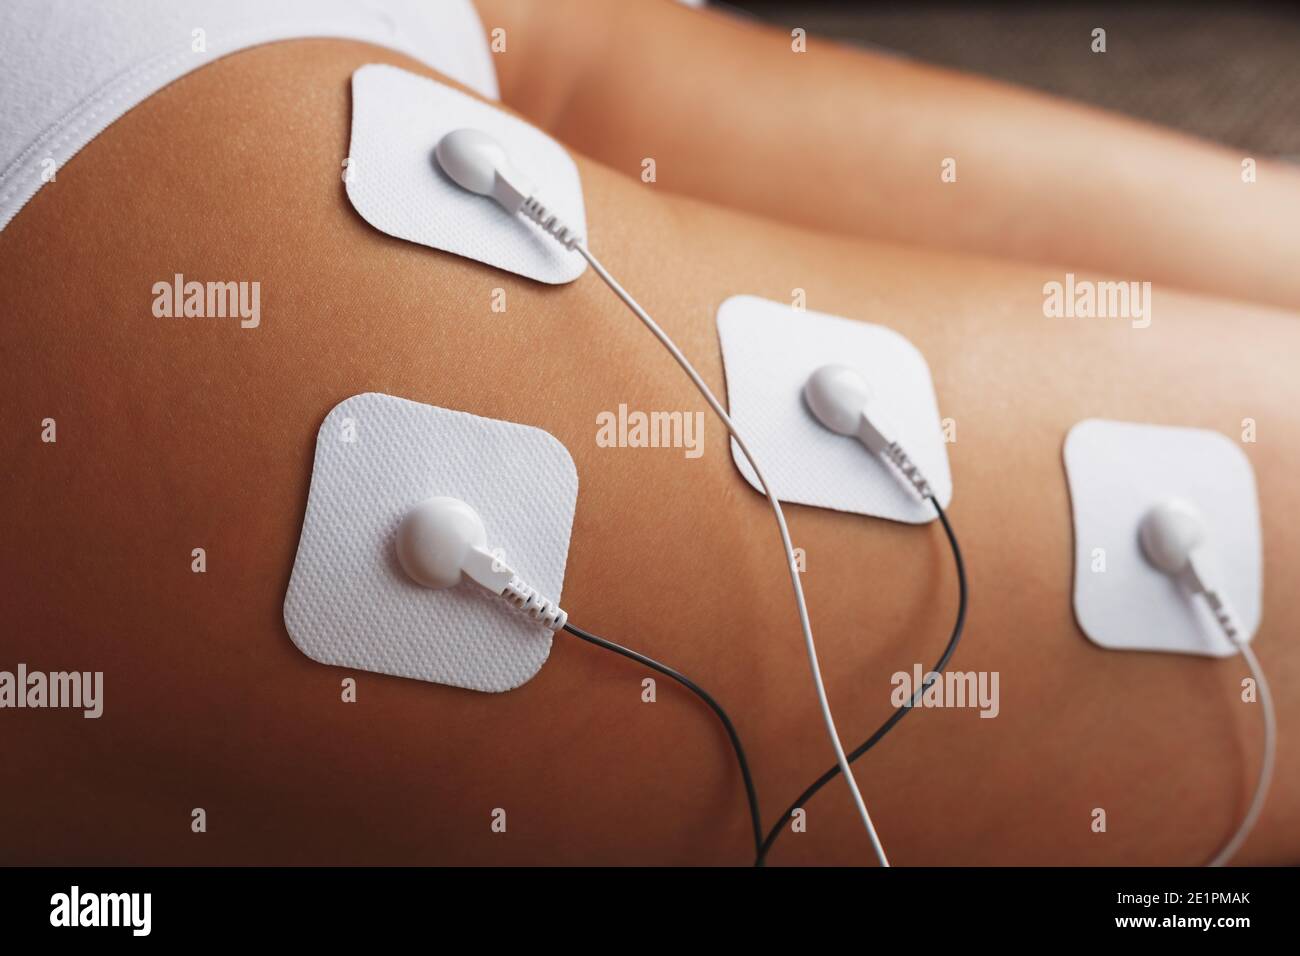 https://c8.alamy.com/comp/2E1PMAK/muscle-stimulator-with-electrodes-the-massager-on-the-buttocks-and-legs-rehabilitation-and-treatment-weight-loss-and-soft-contrast-2E1PMAK.jpg